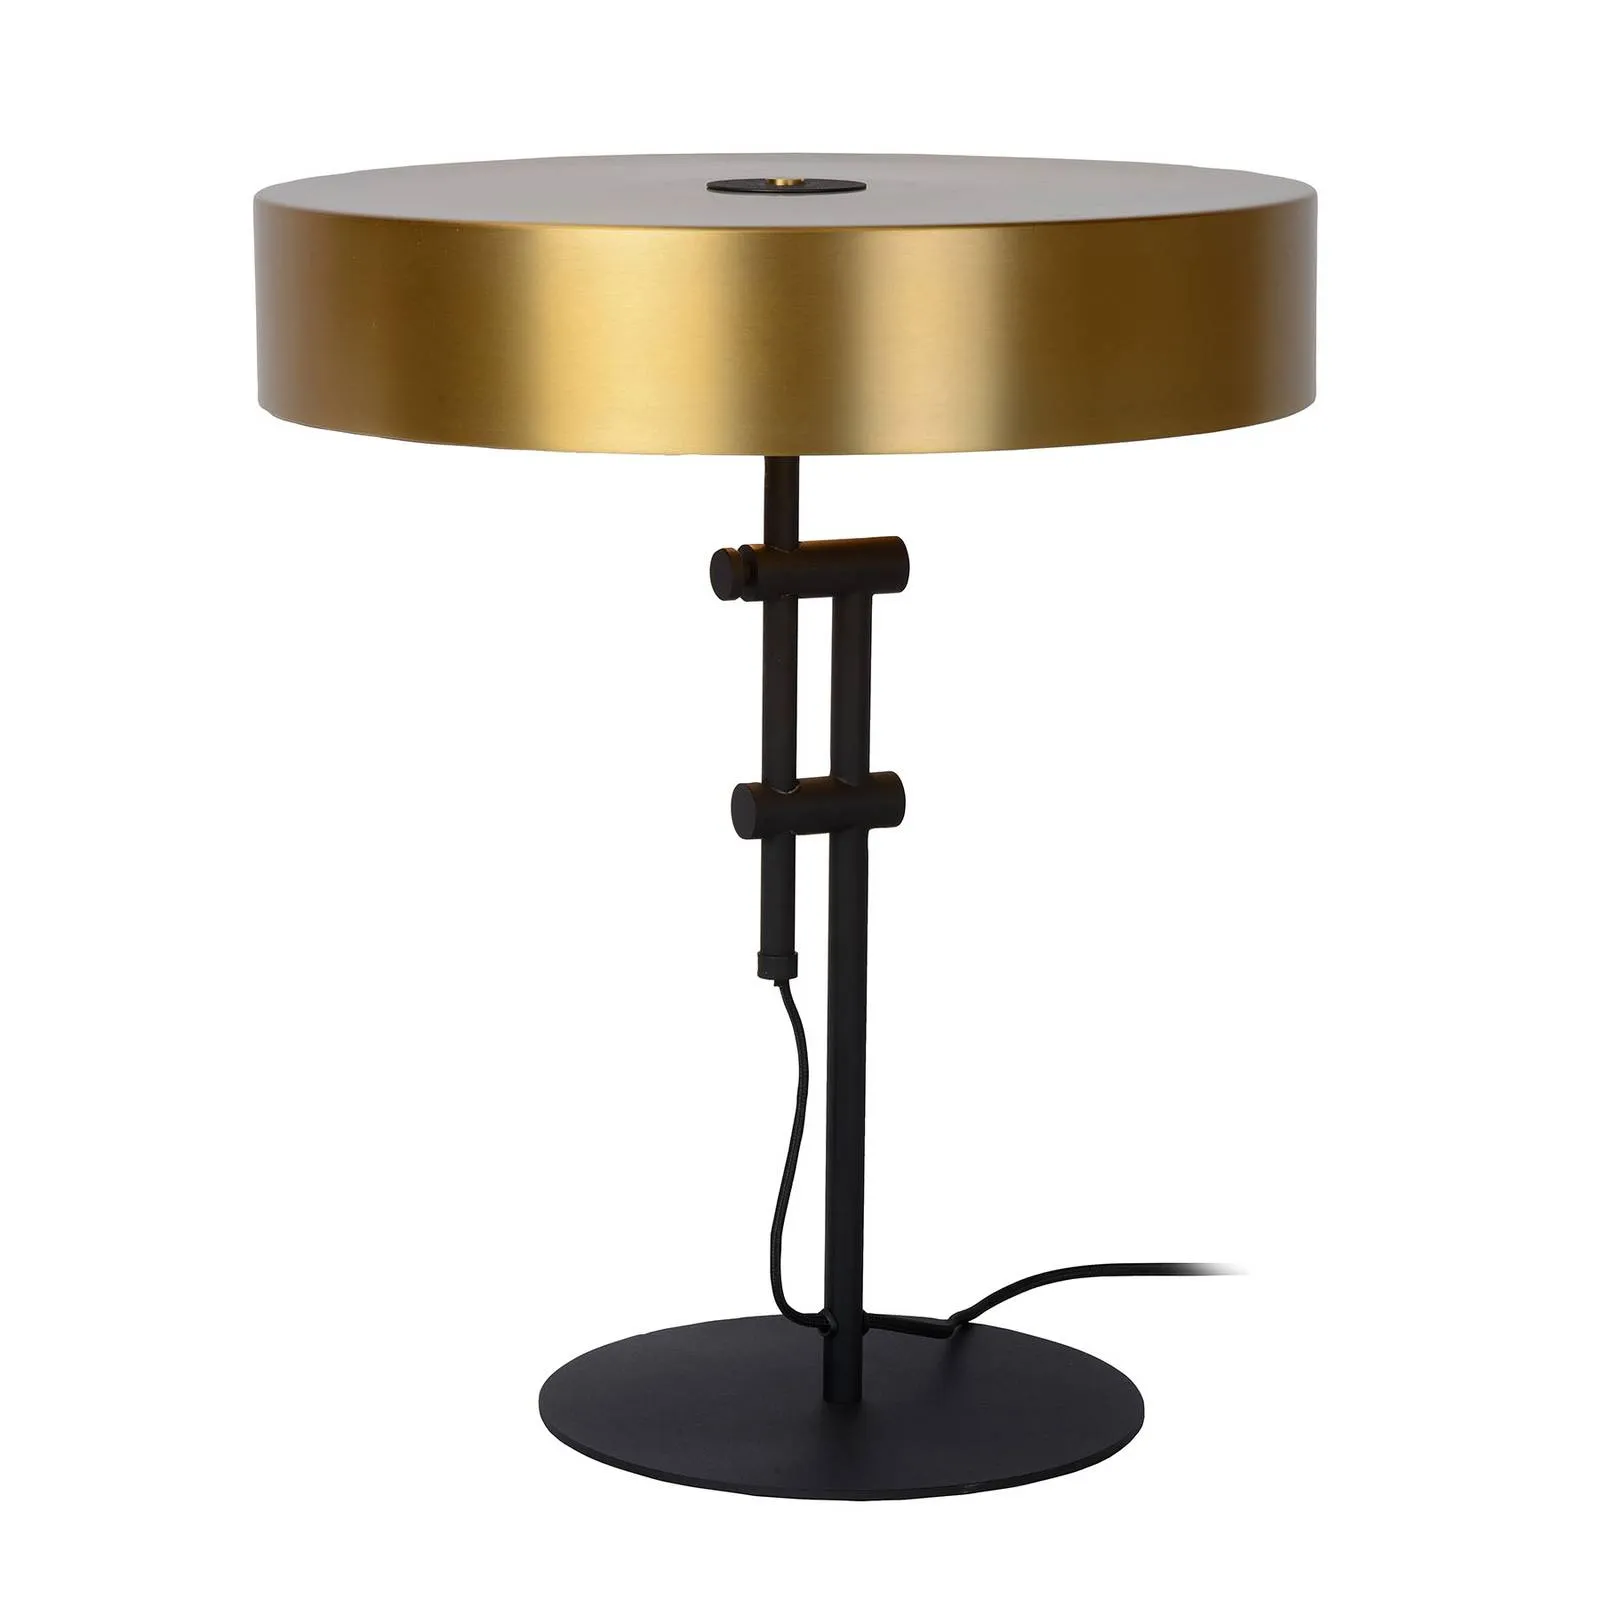 Giada table lamp with a flat lampshade in gold